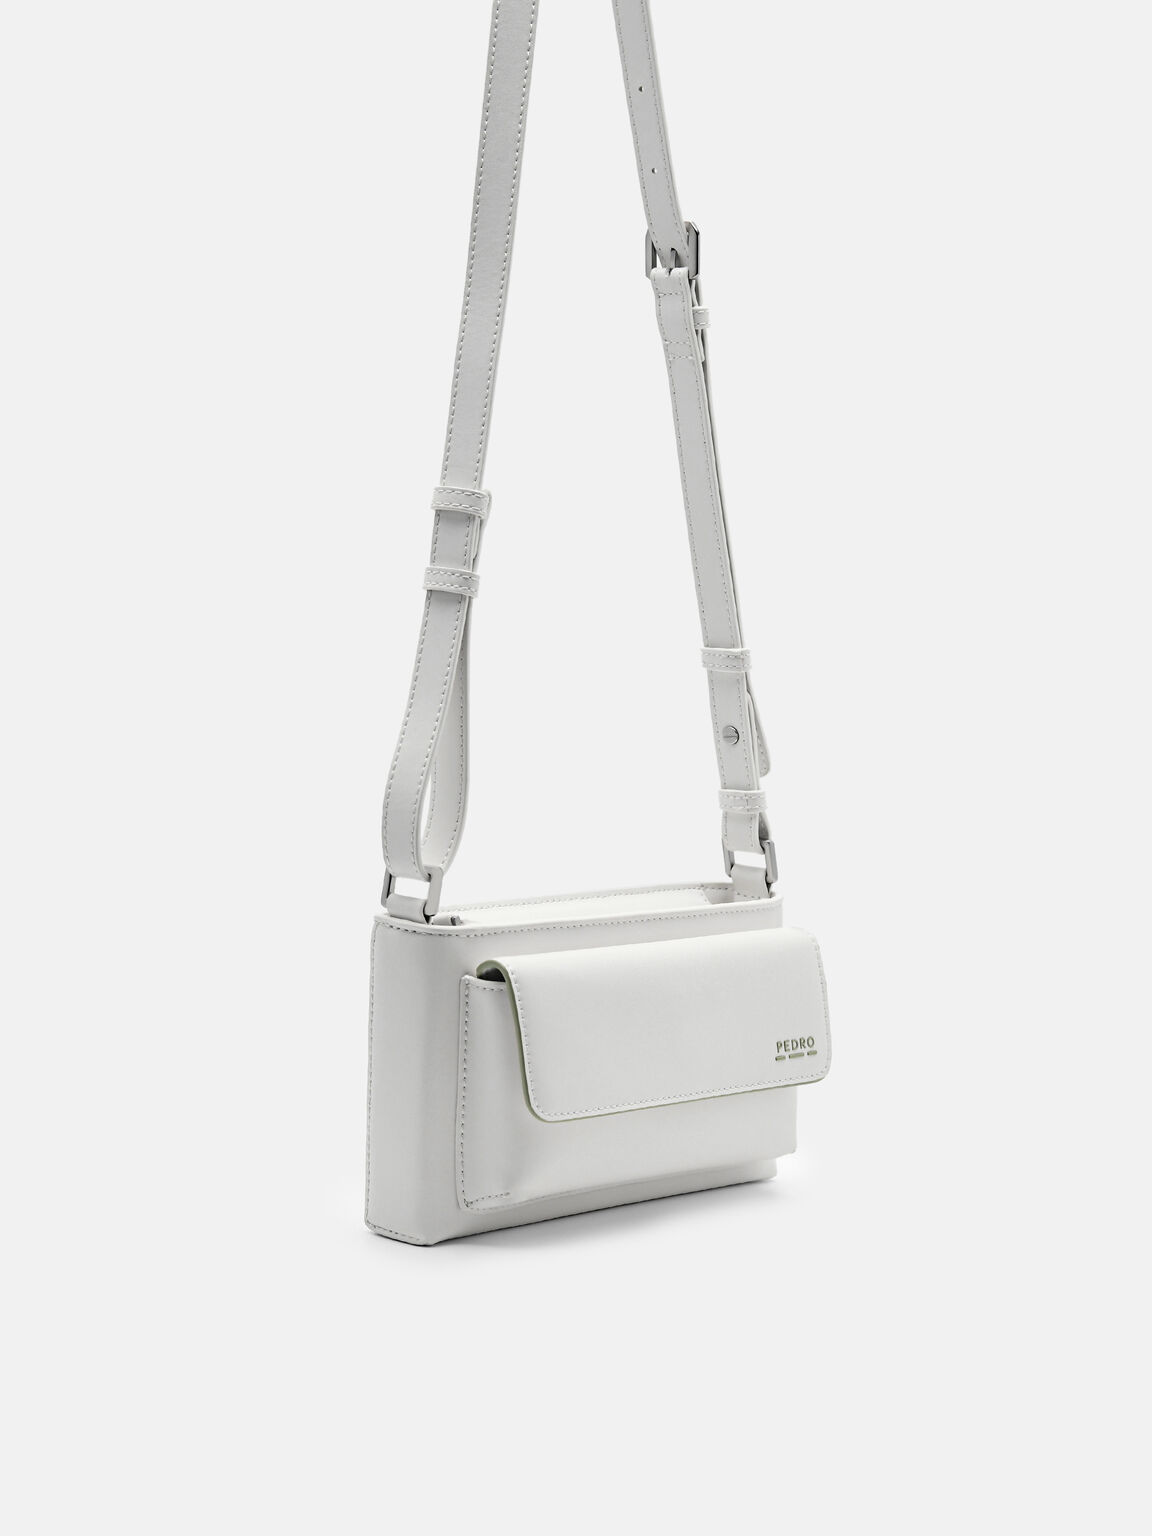 rePEDRO Recycled Leather Mini Sling Bag, White